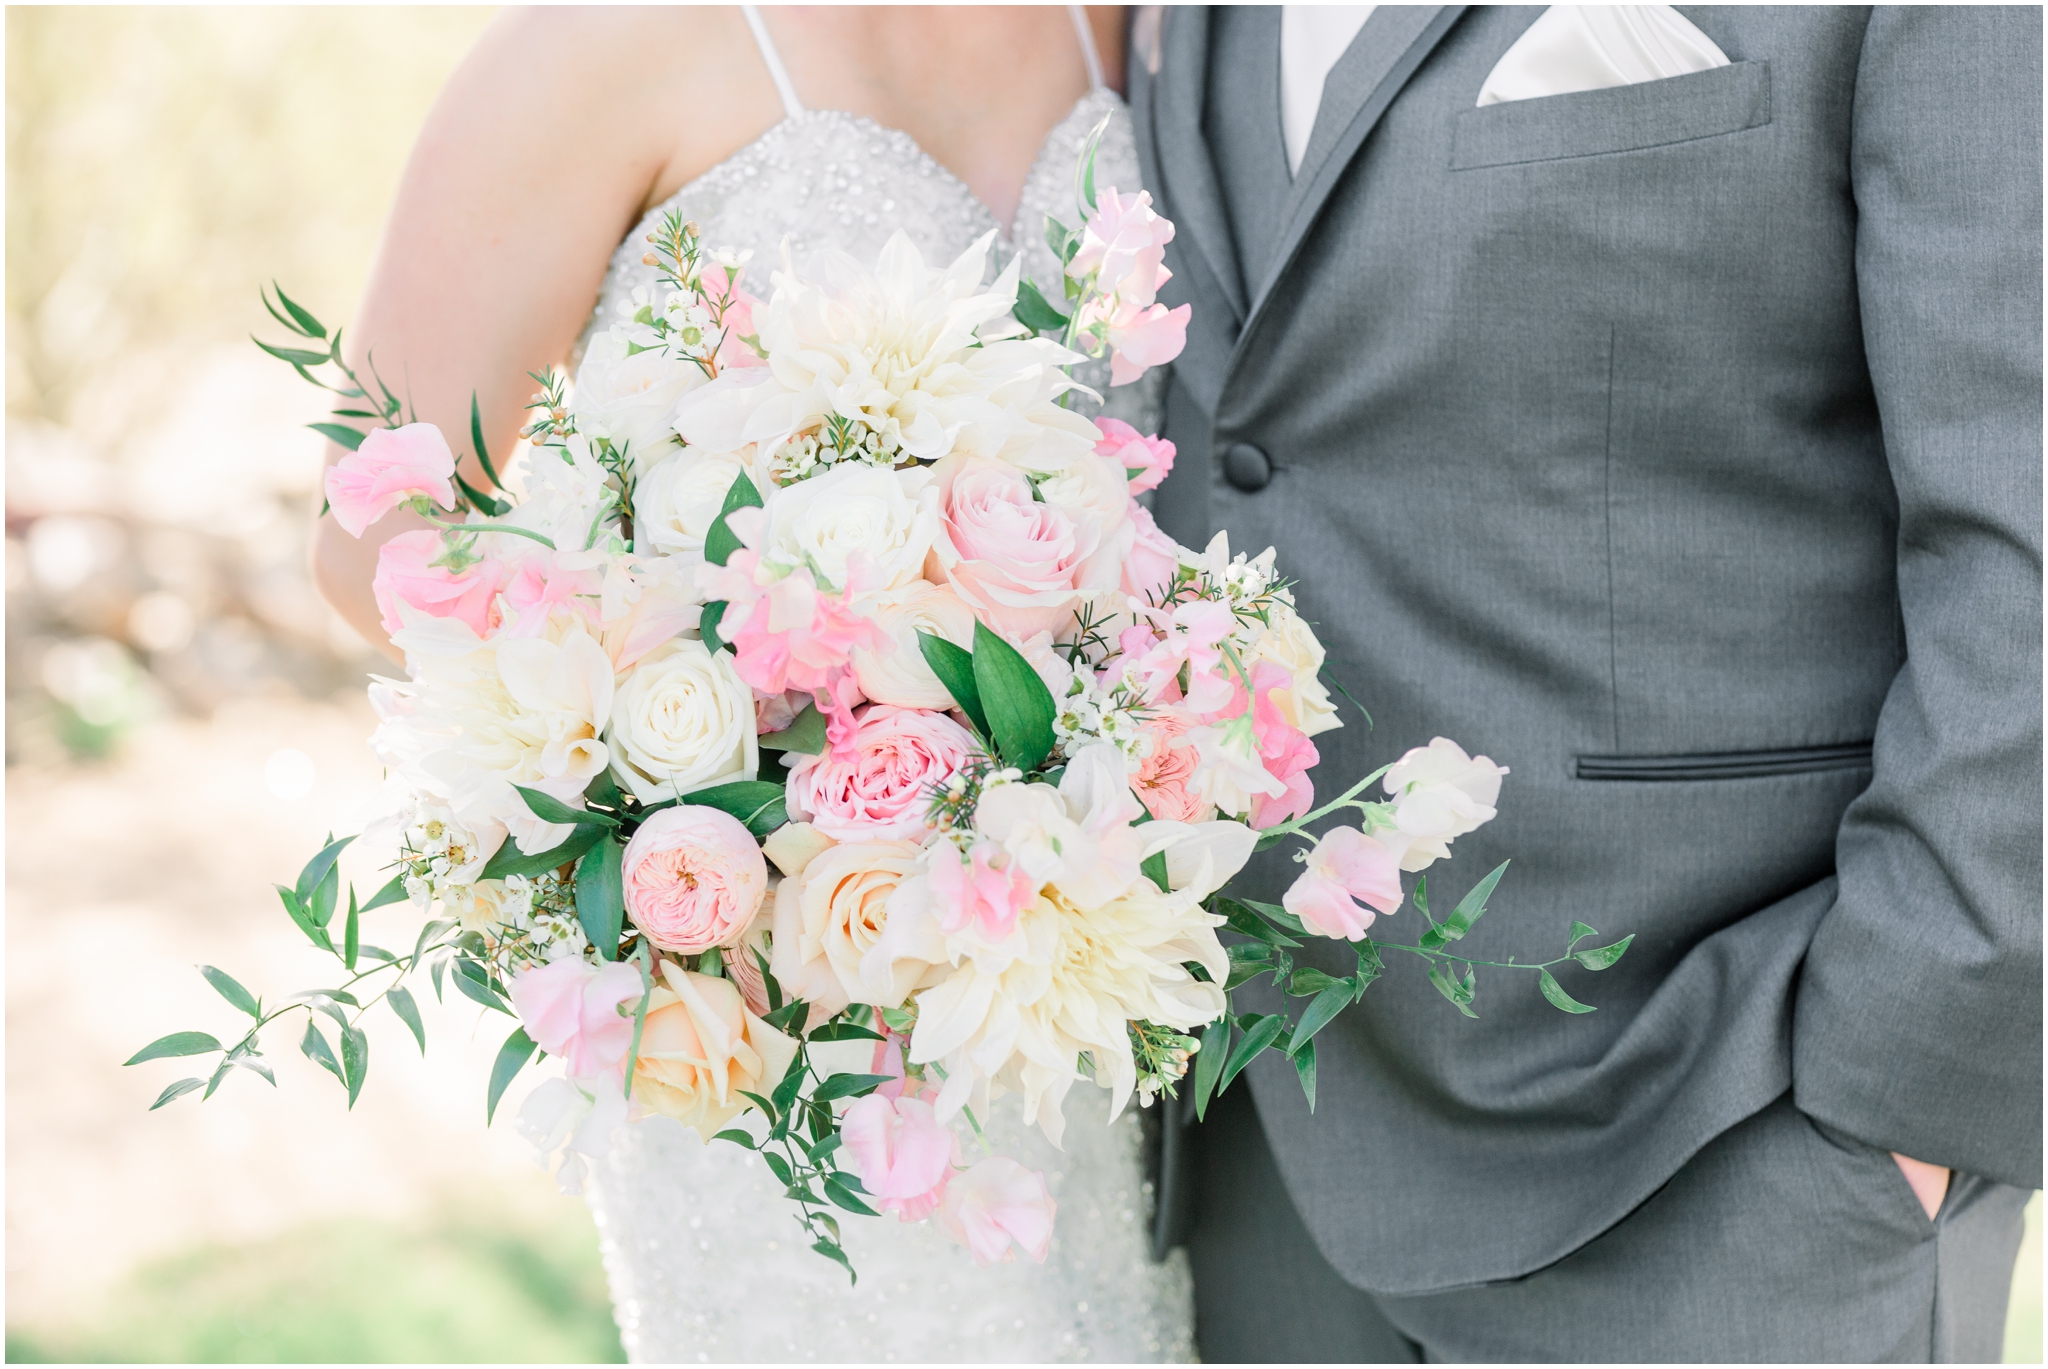 Bride and groom holding blush and white bouquet